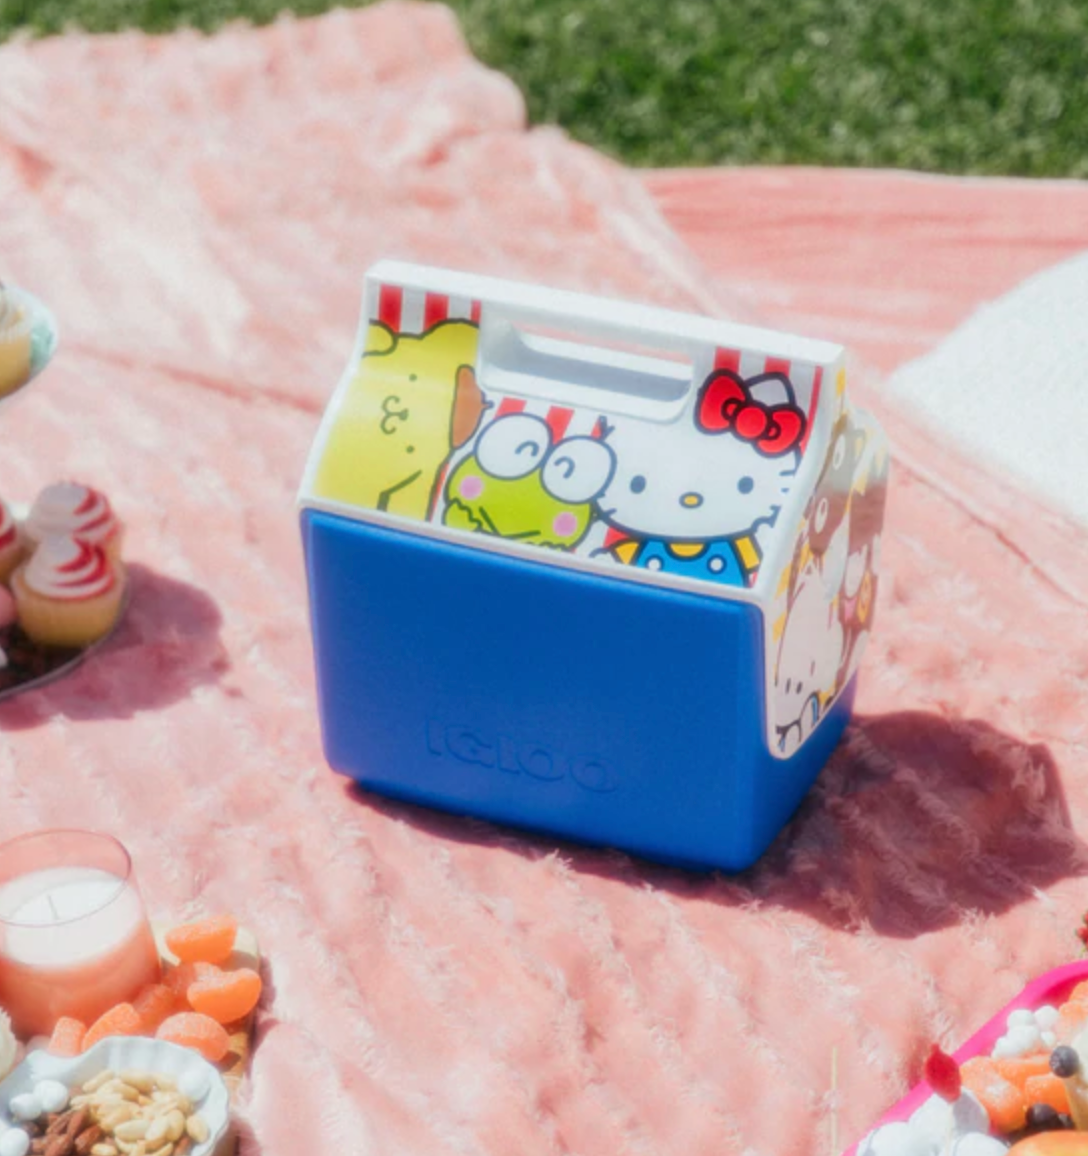 The cooler with Hello Kitty and Friends on the lid